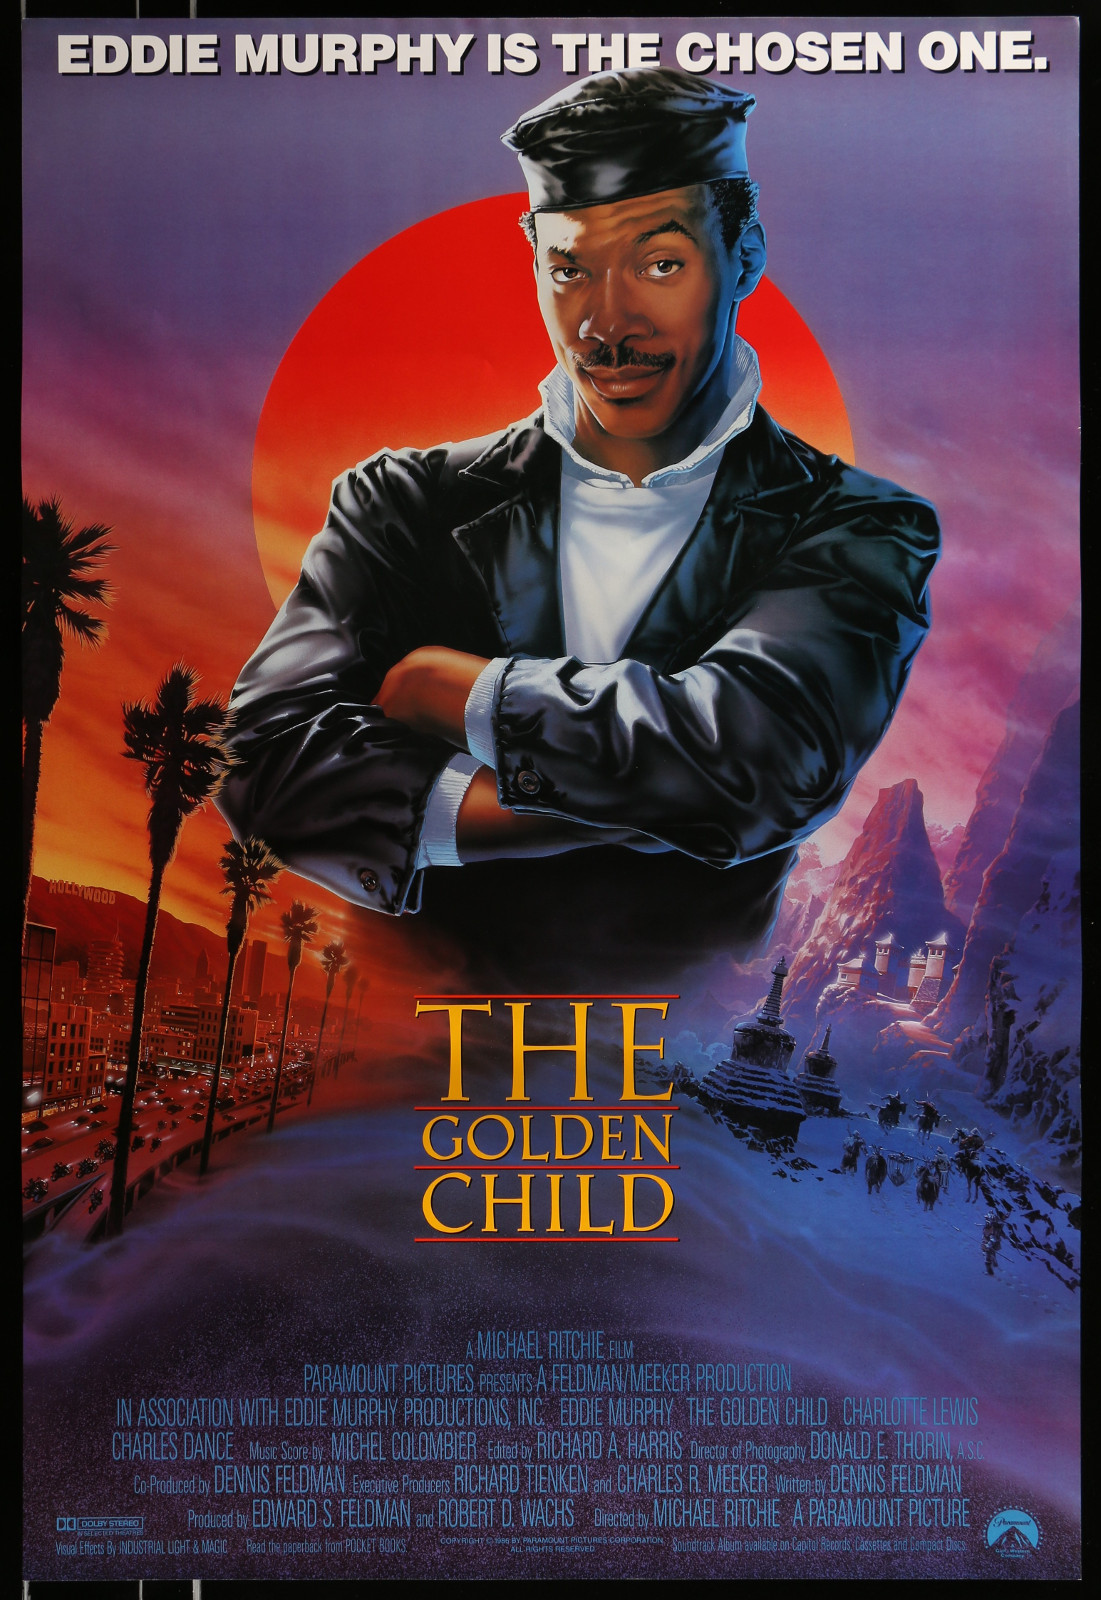 The Golden Child 2A364 A Part Of A Lot 29 Unfolded Mostly Single-Sided 27X40 One-Sheets '90S-00S Great Movie Images!